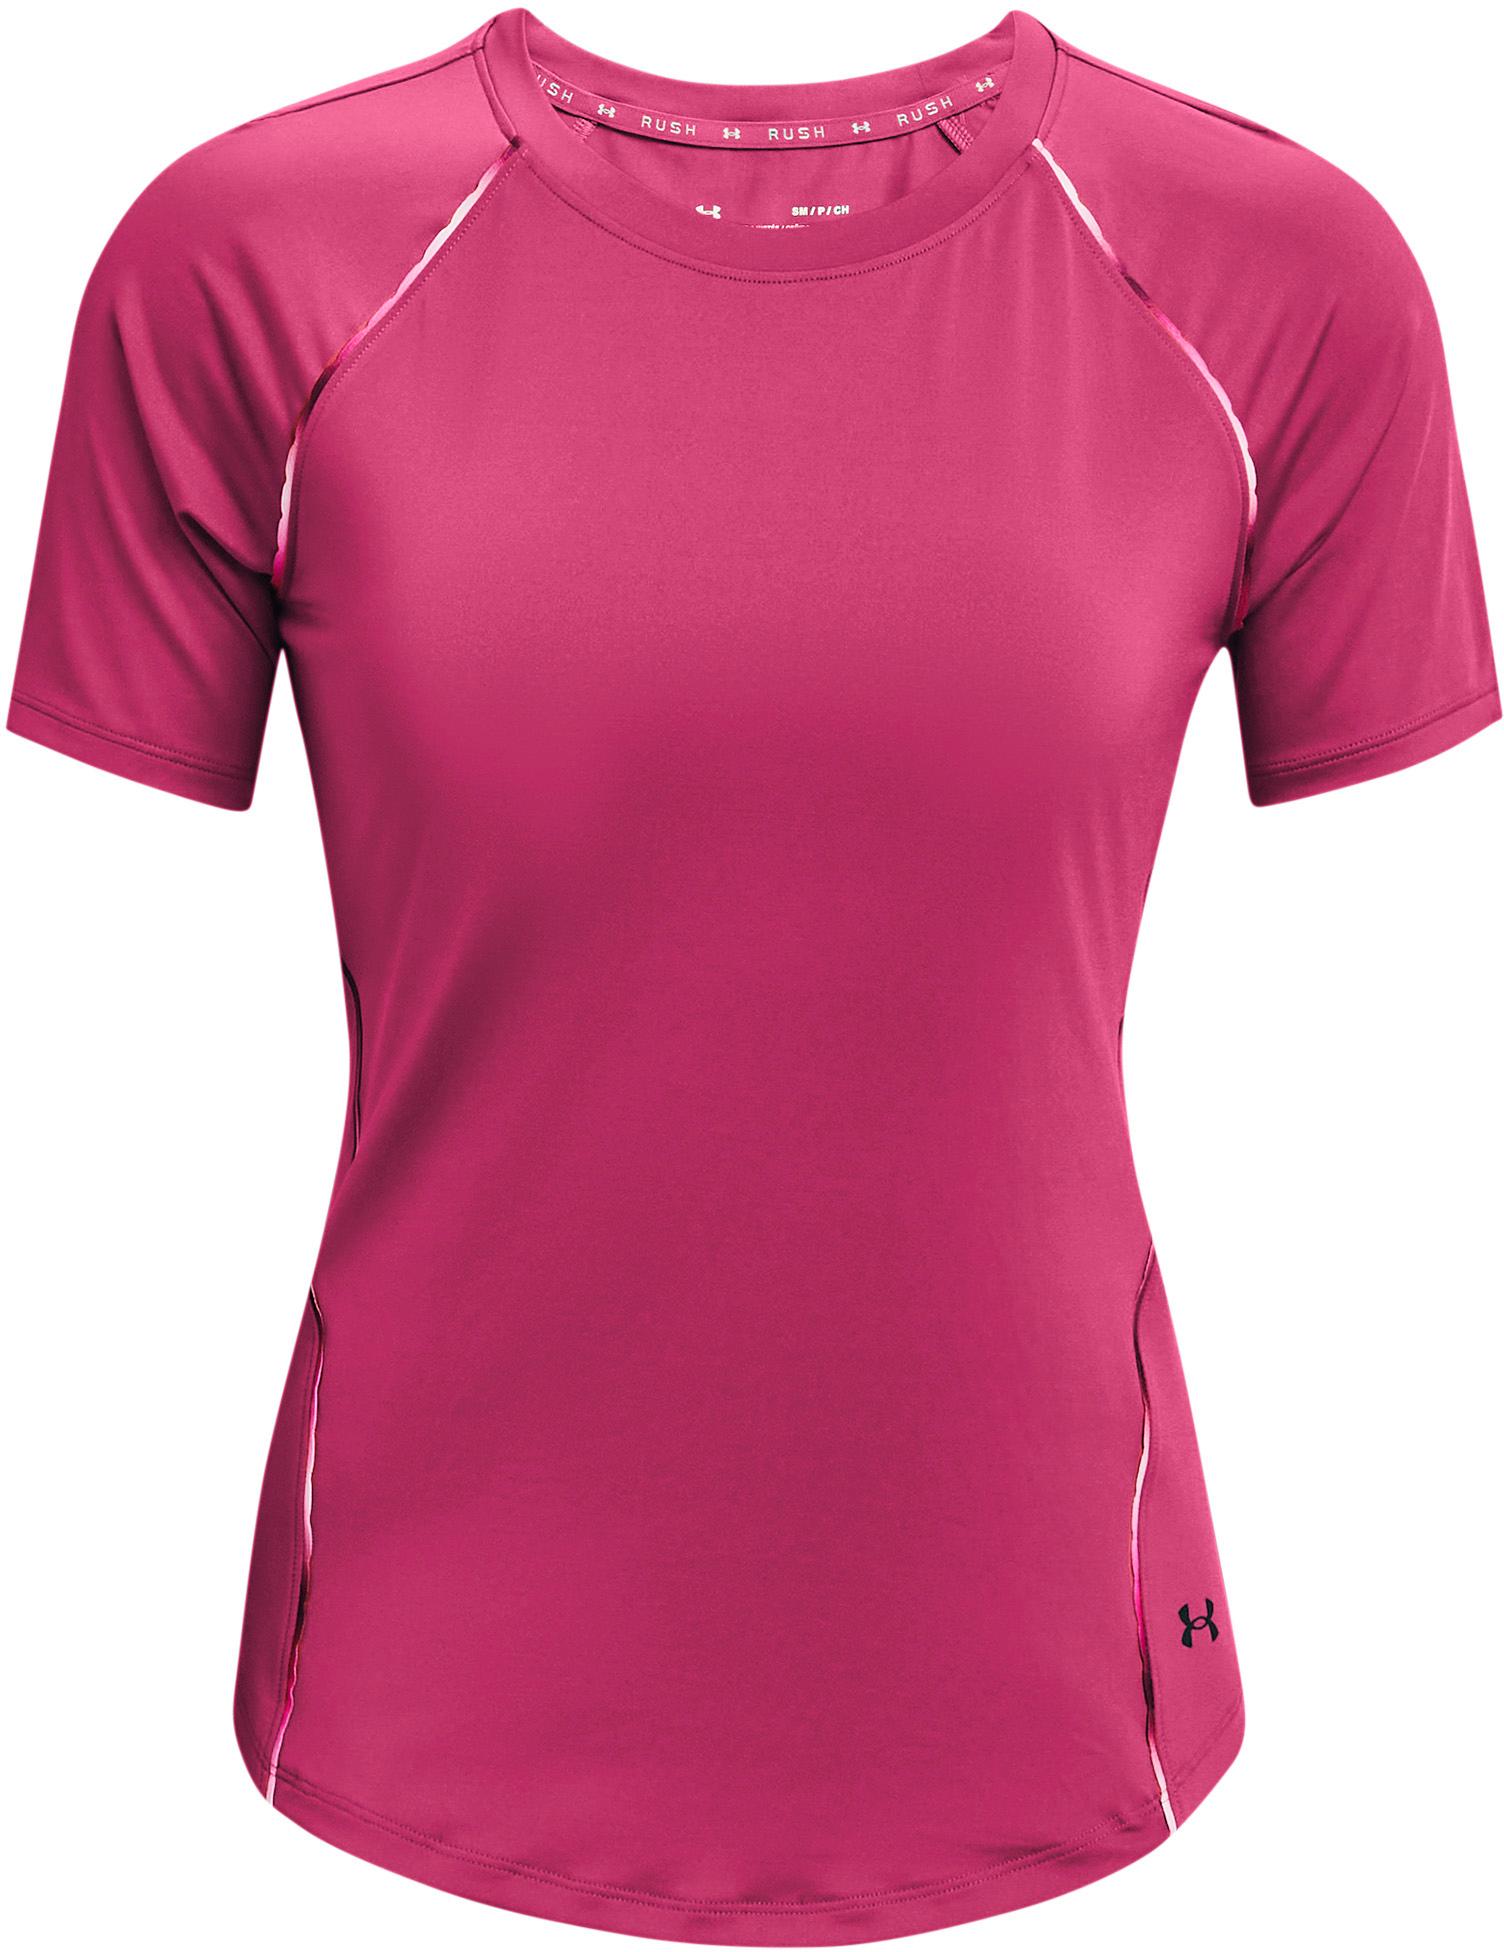 Image of Under Armour Rush Scallop SS Funktionsshirt Damen